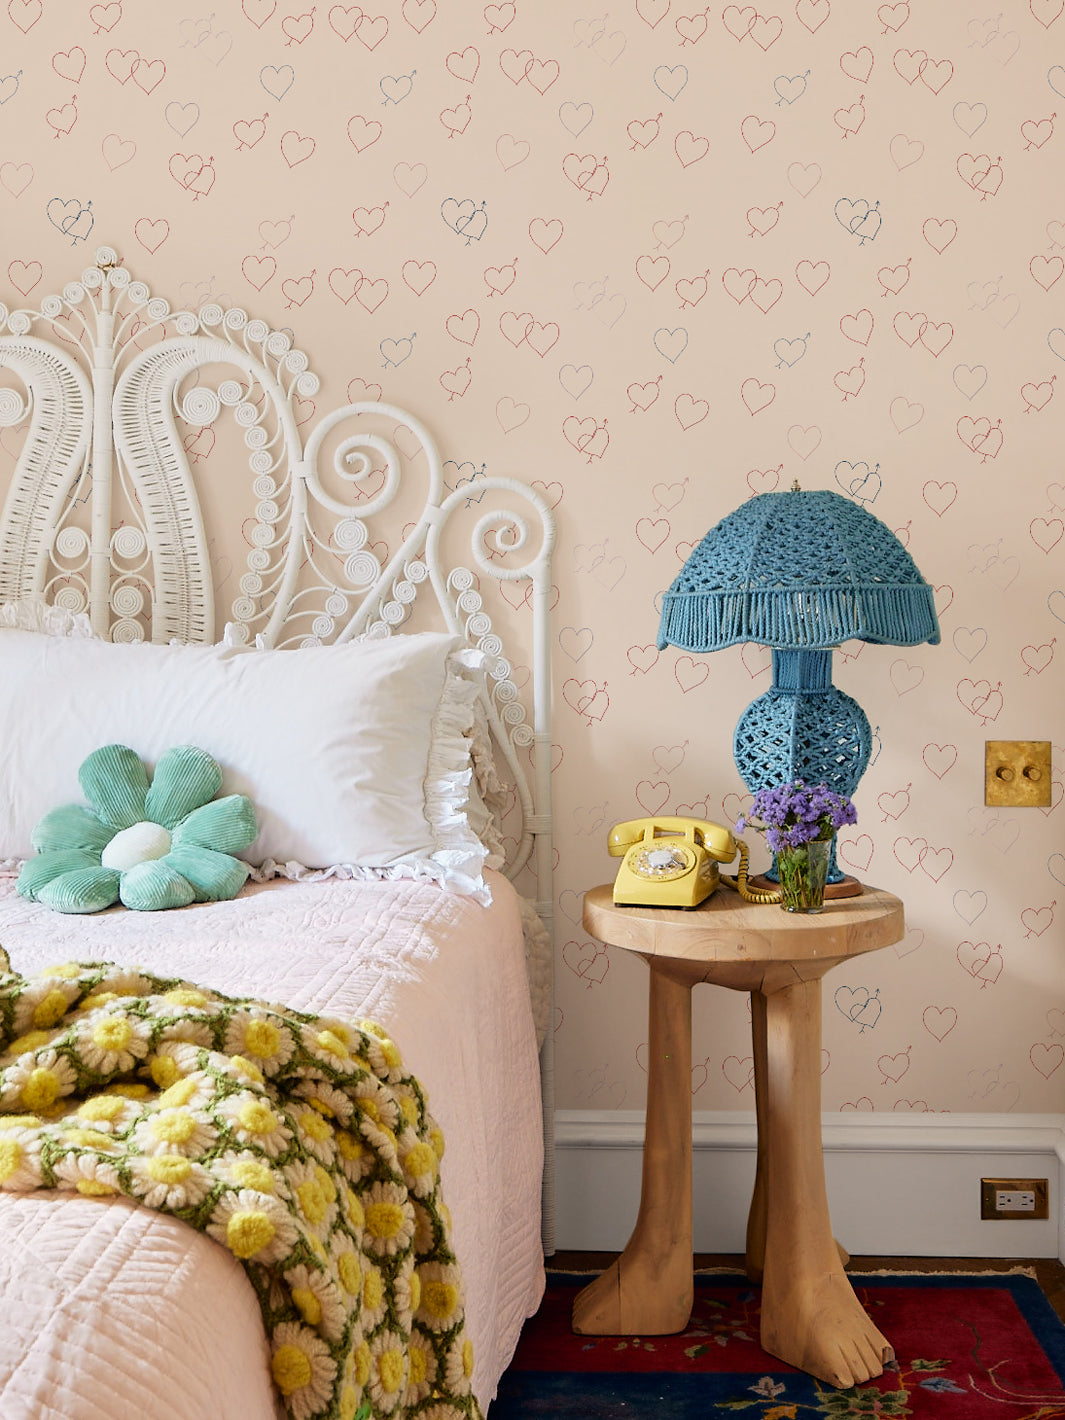 'Embroidered Hearts' Wallpaper by Lingua Franca - Cream